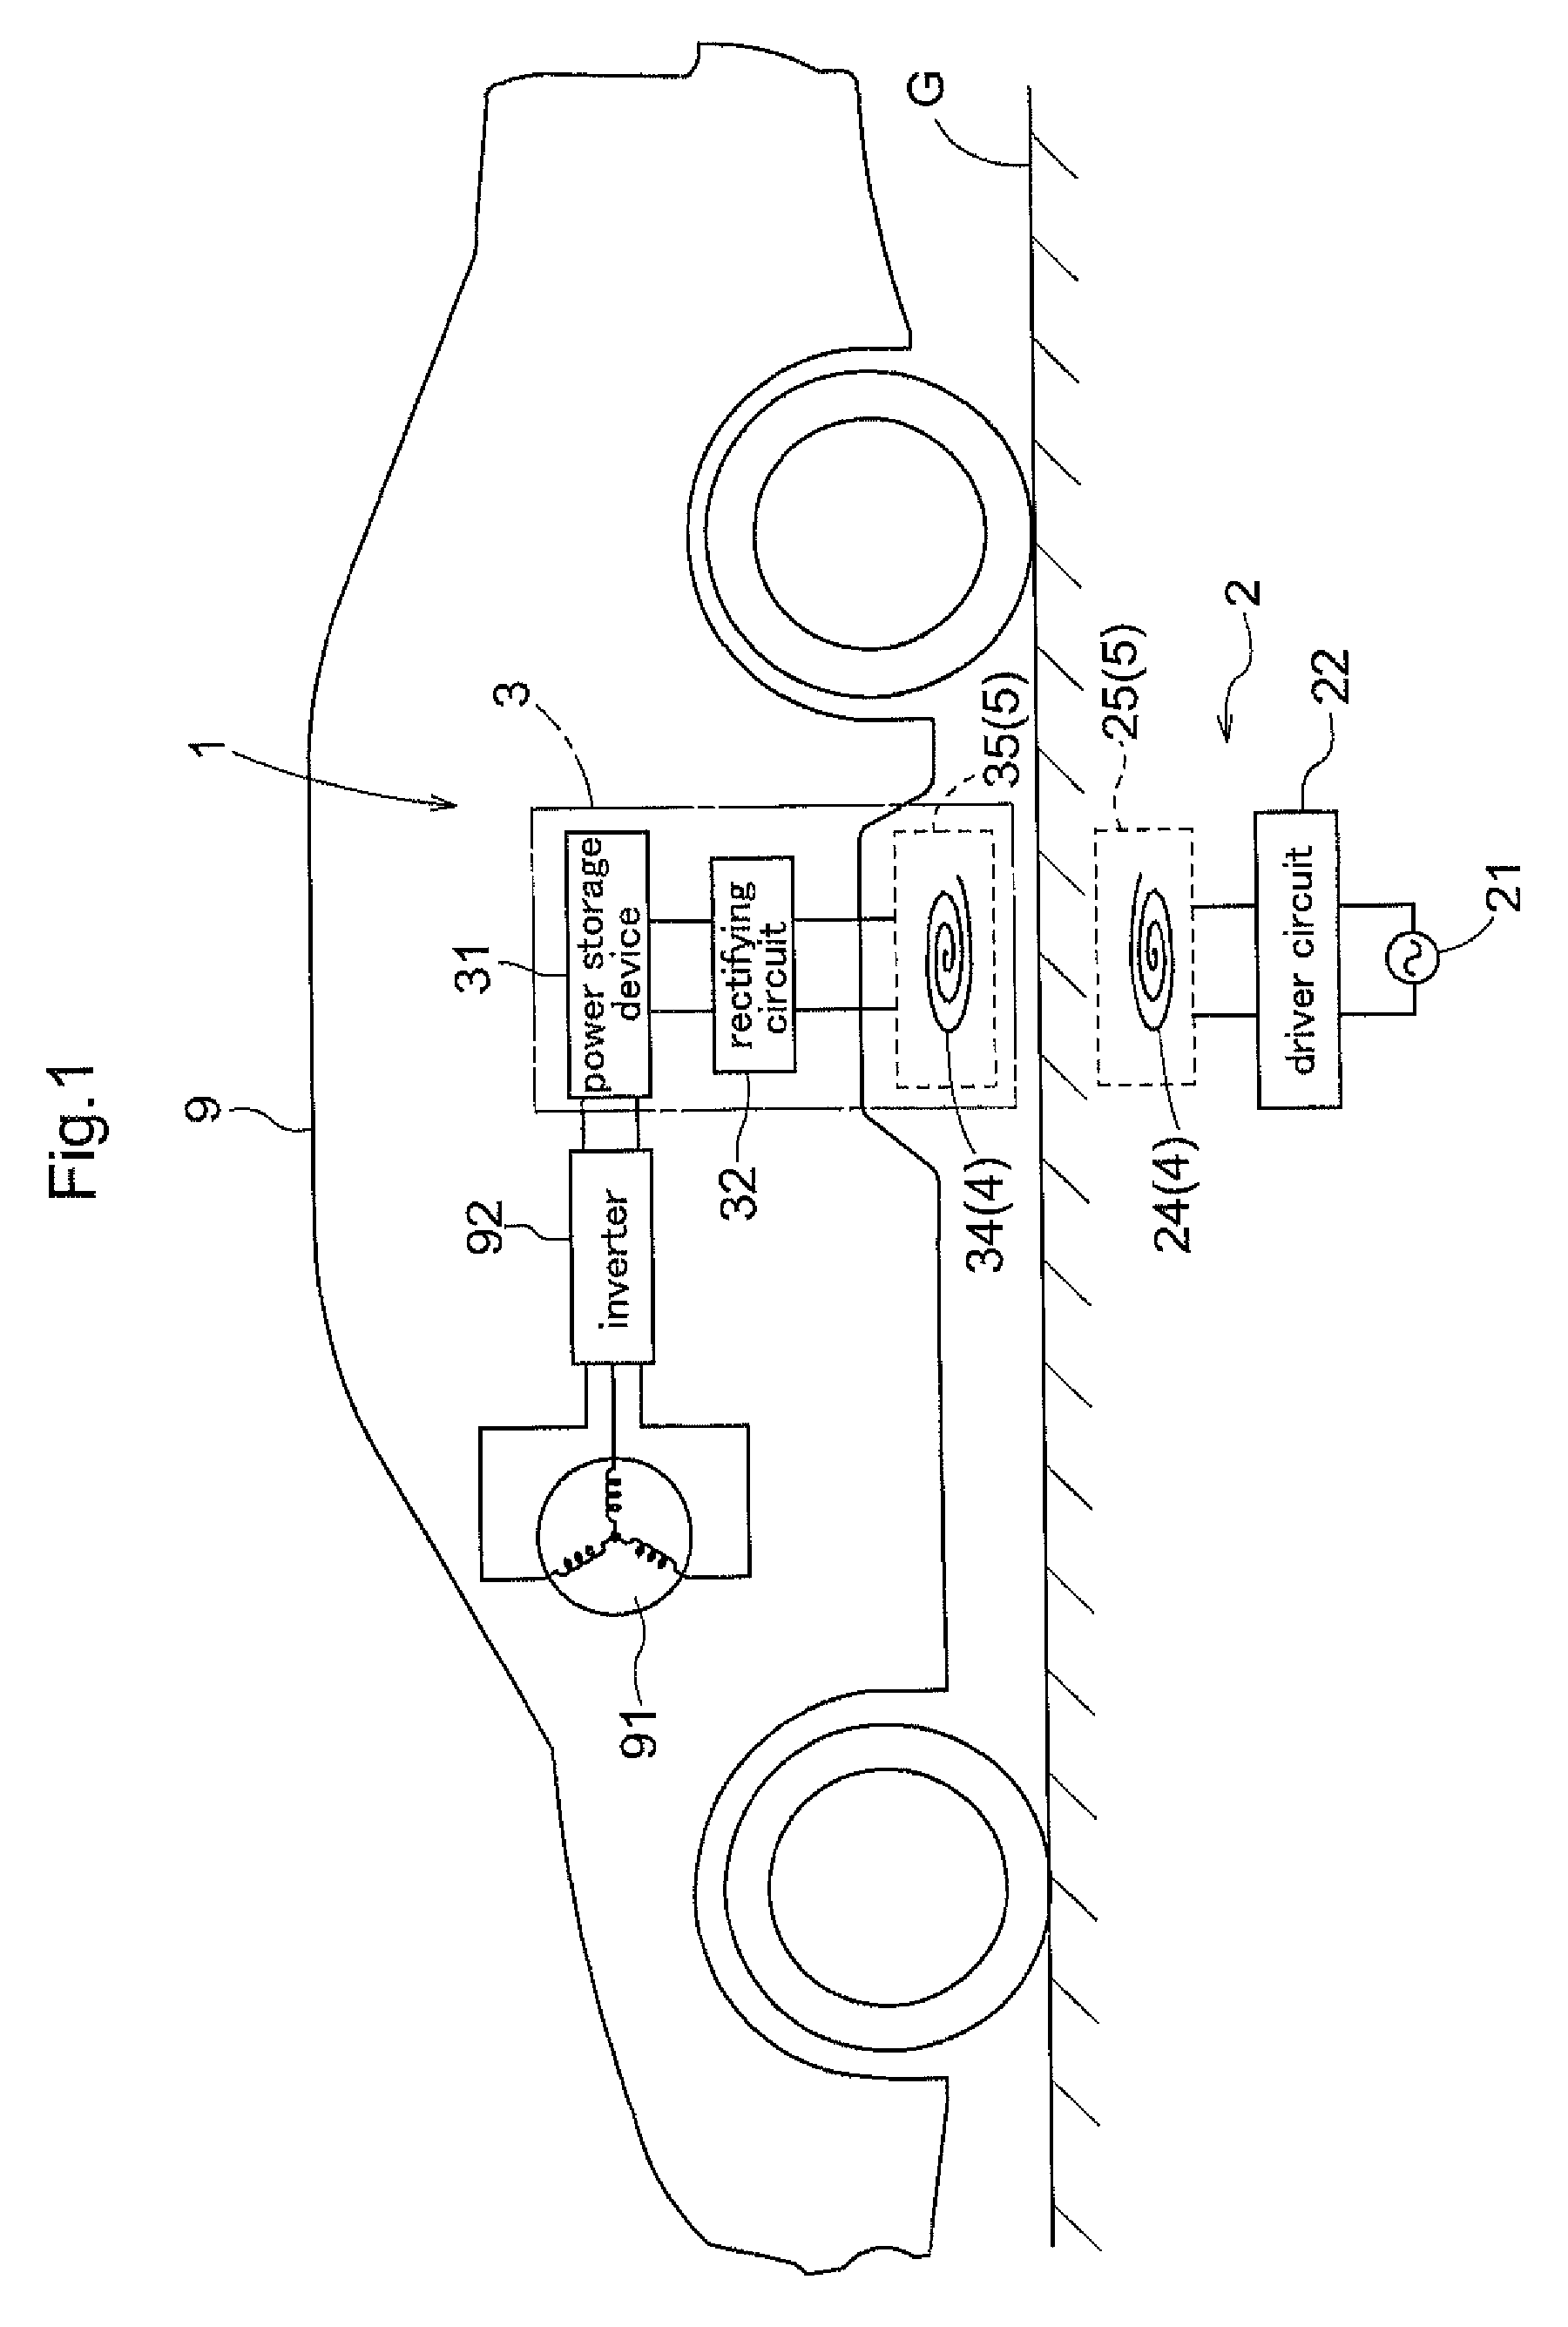 Antenna coil comprising plurality of coil portions